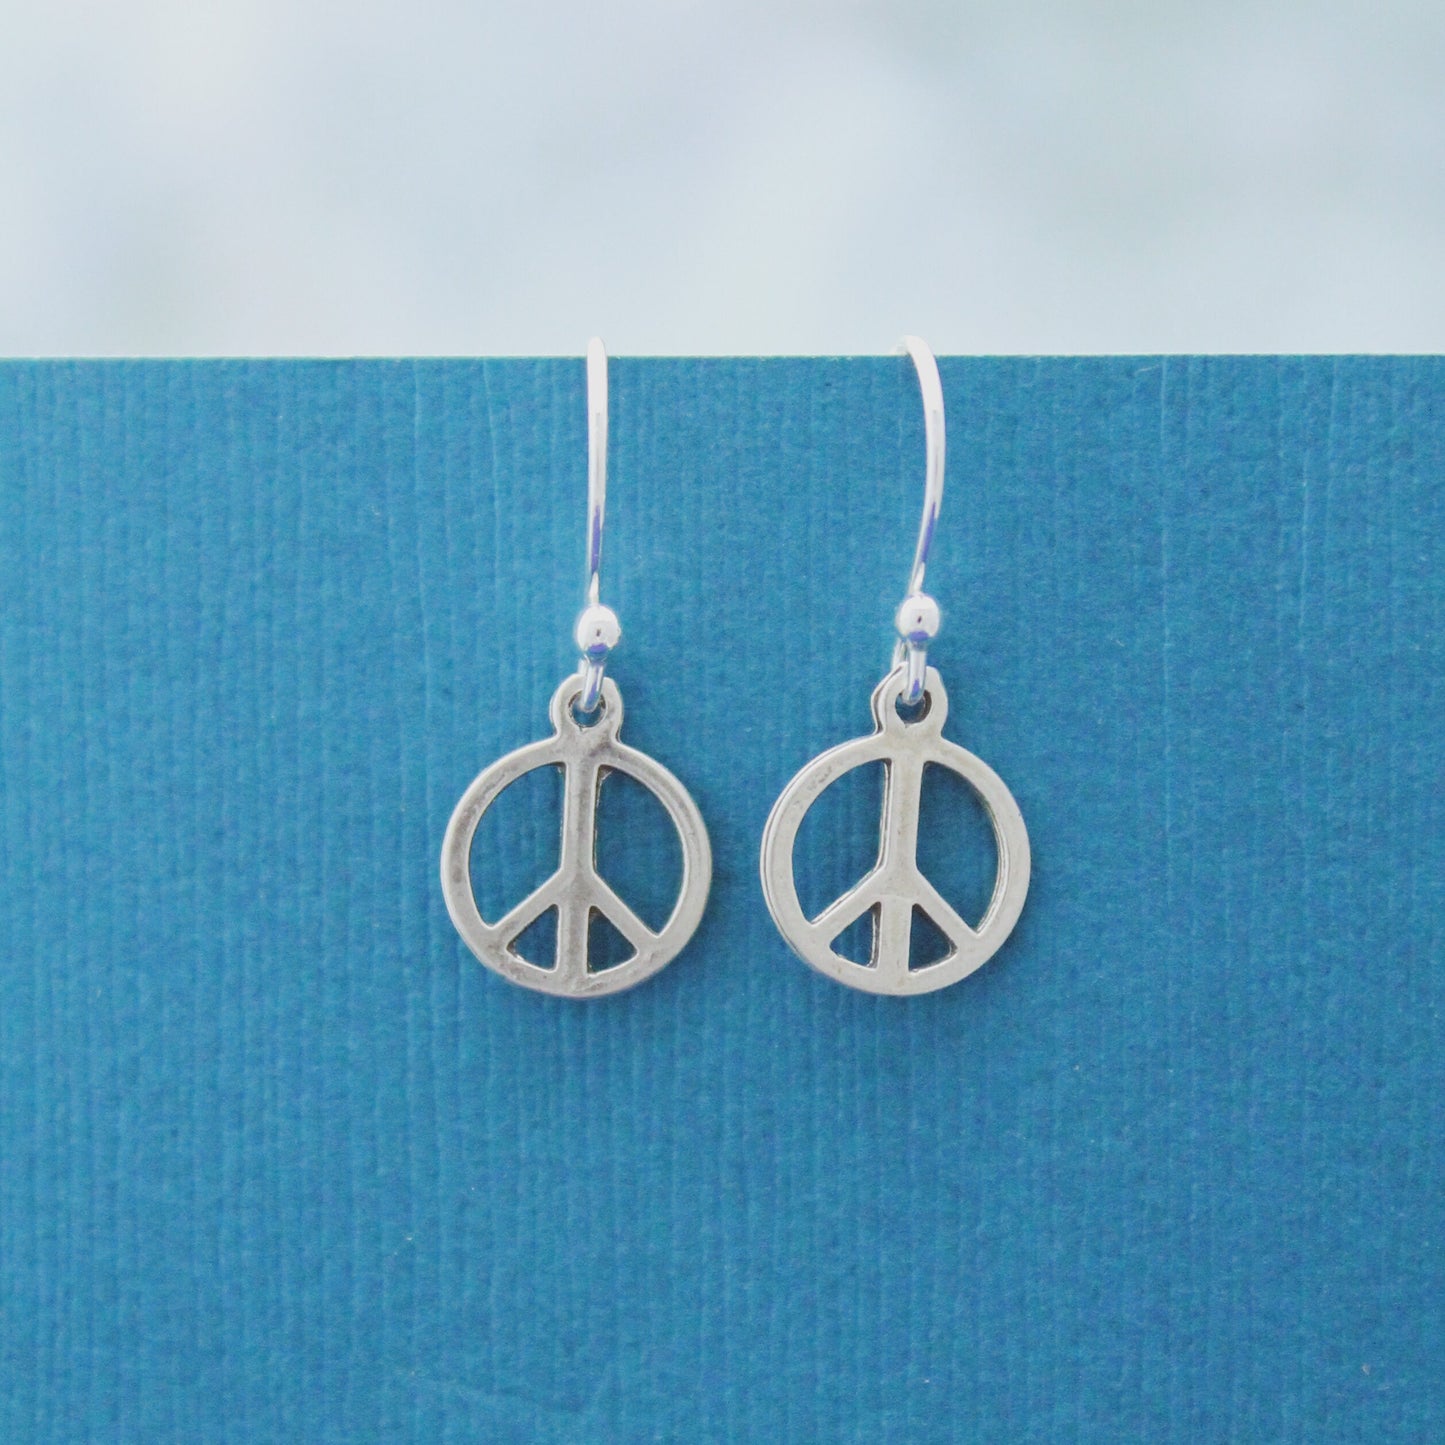 Cute Peace Sign Earrings, Sterling Silver Peace Earrings, Birthday Gift, Peace Sign Jewelry, Gifts for Her, Dainty Silver Earrings, Peace